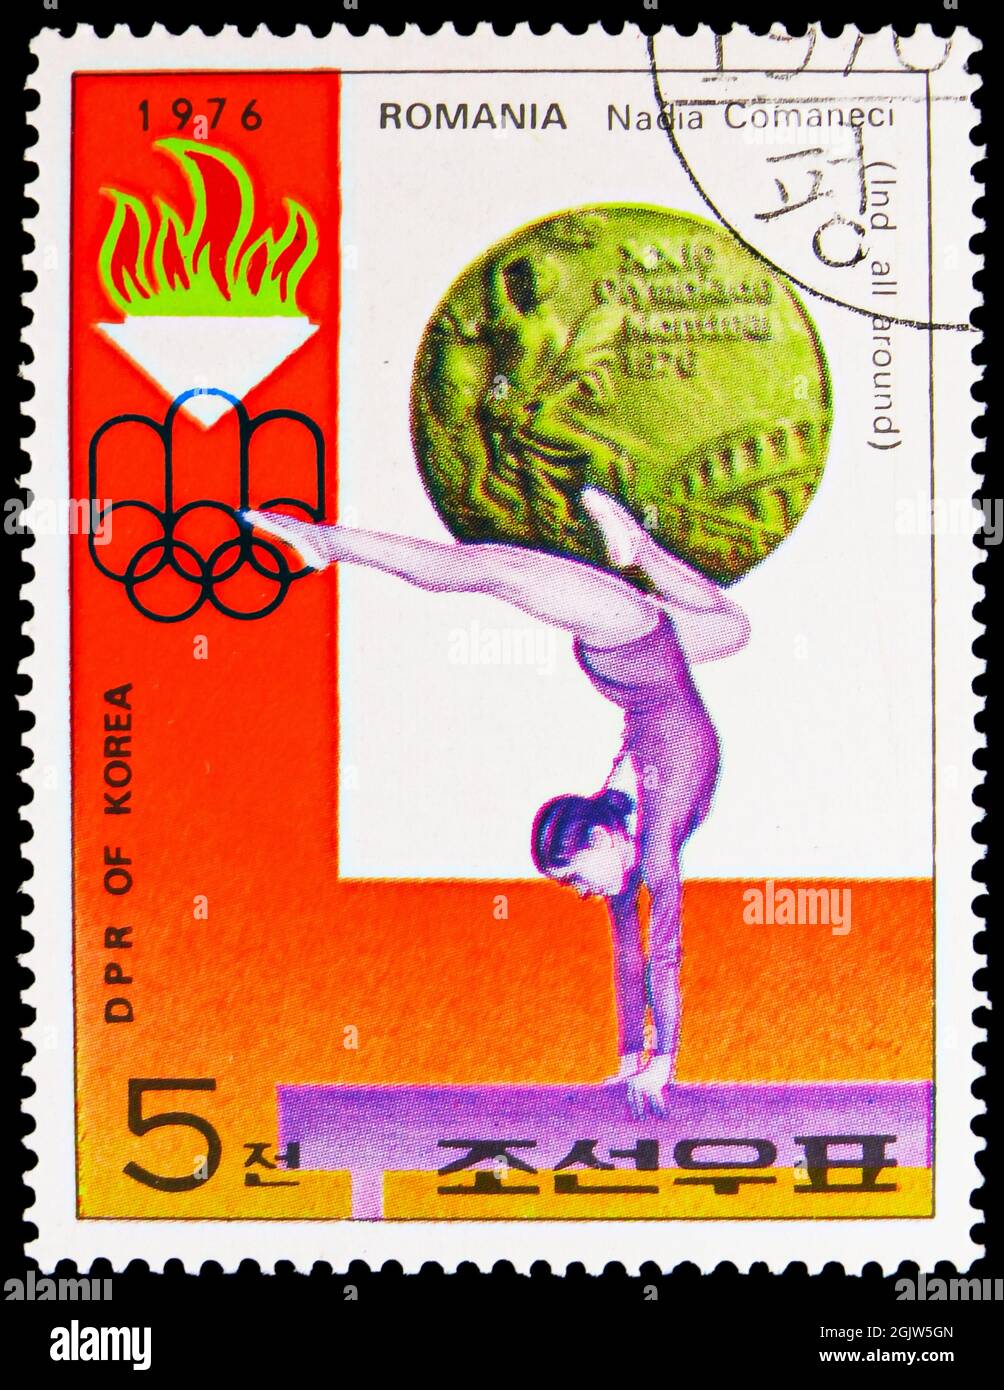 MOSCOW, RUSSIA - JUNE 20, 2021: Postage stamp printed in Korea shows Nadia Comaneci, Romania - Indoor all around, Summer Olympic Games 1976 - Montreal Stock Photo